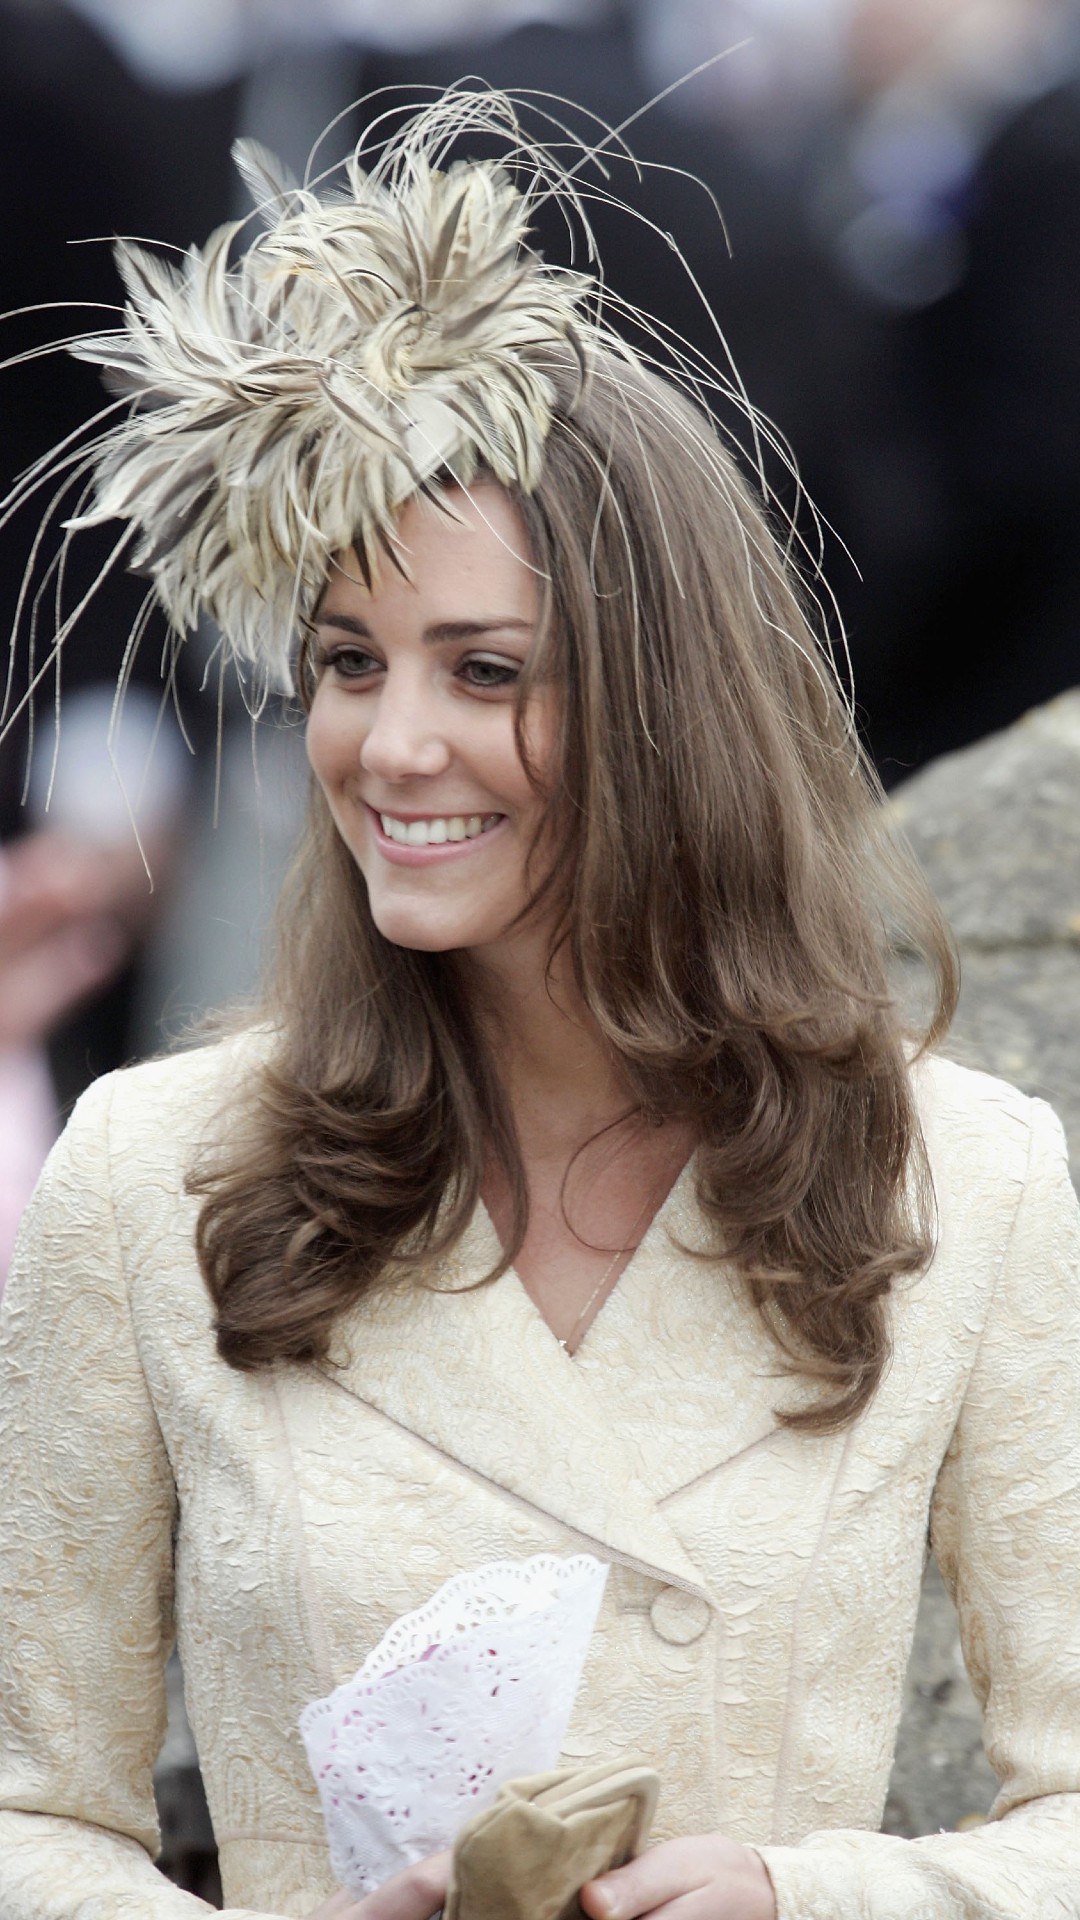 35 facts about Kate Middleton, Princess of Wales